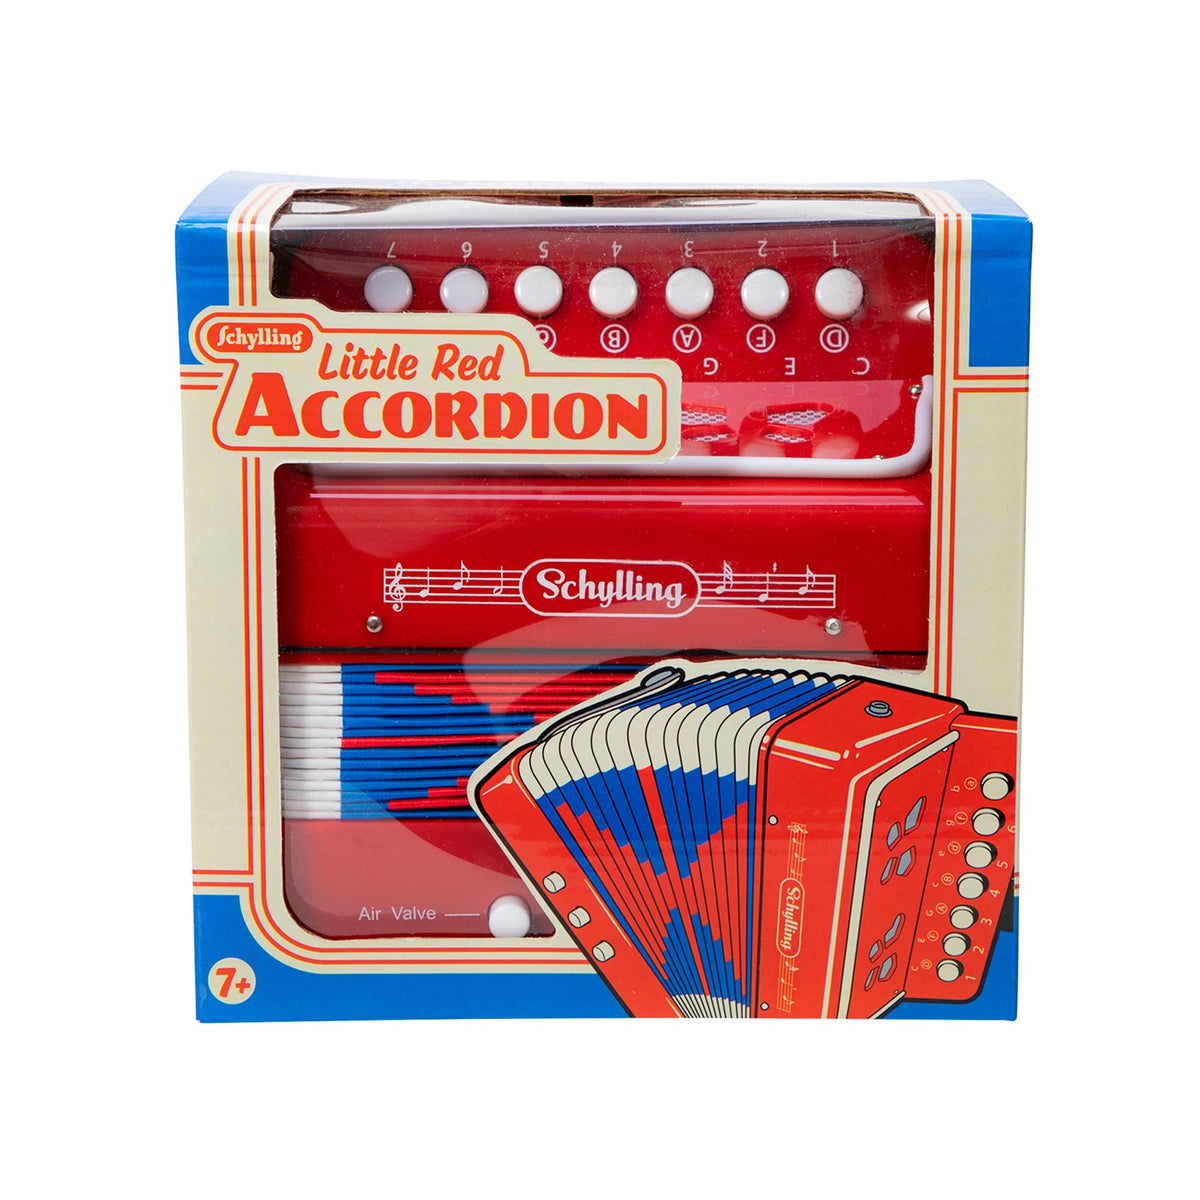 Front view of the accordion in its box.